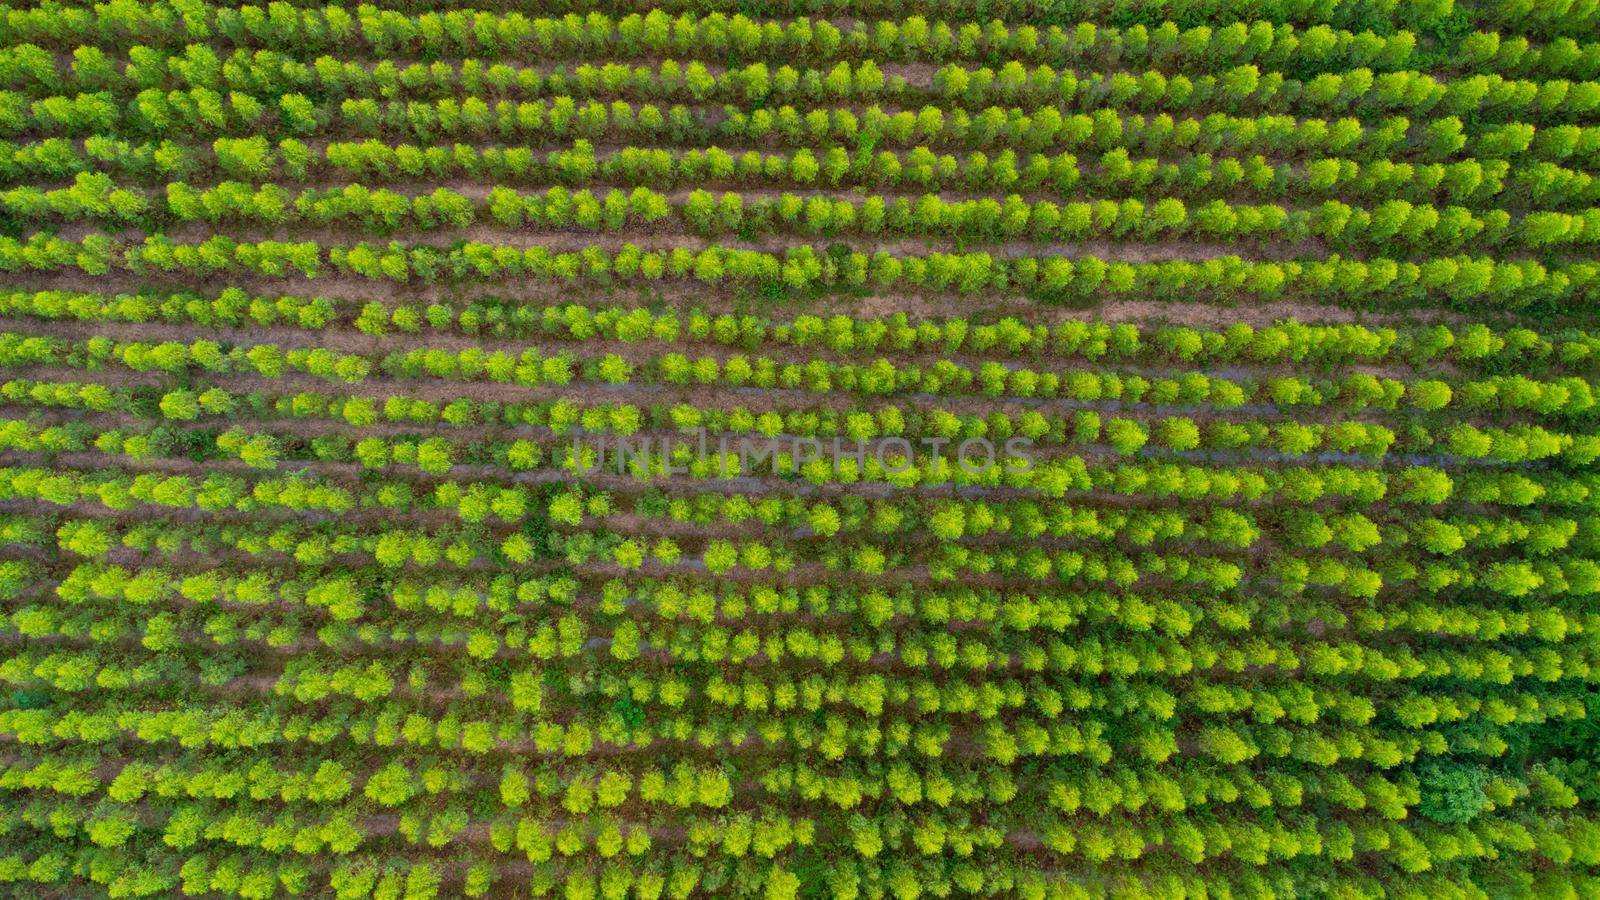 Aerial view of Eucalyptus plantation in Thailand. Aerial capture with drone.